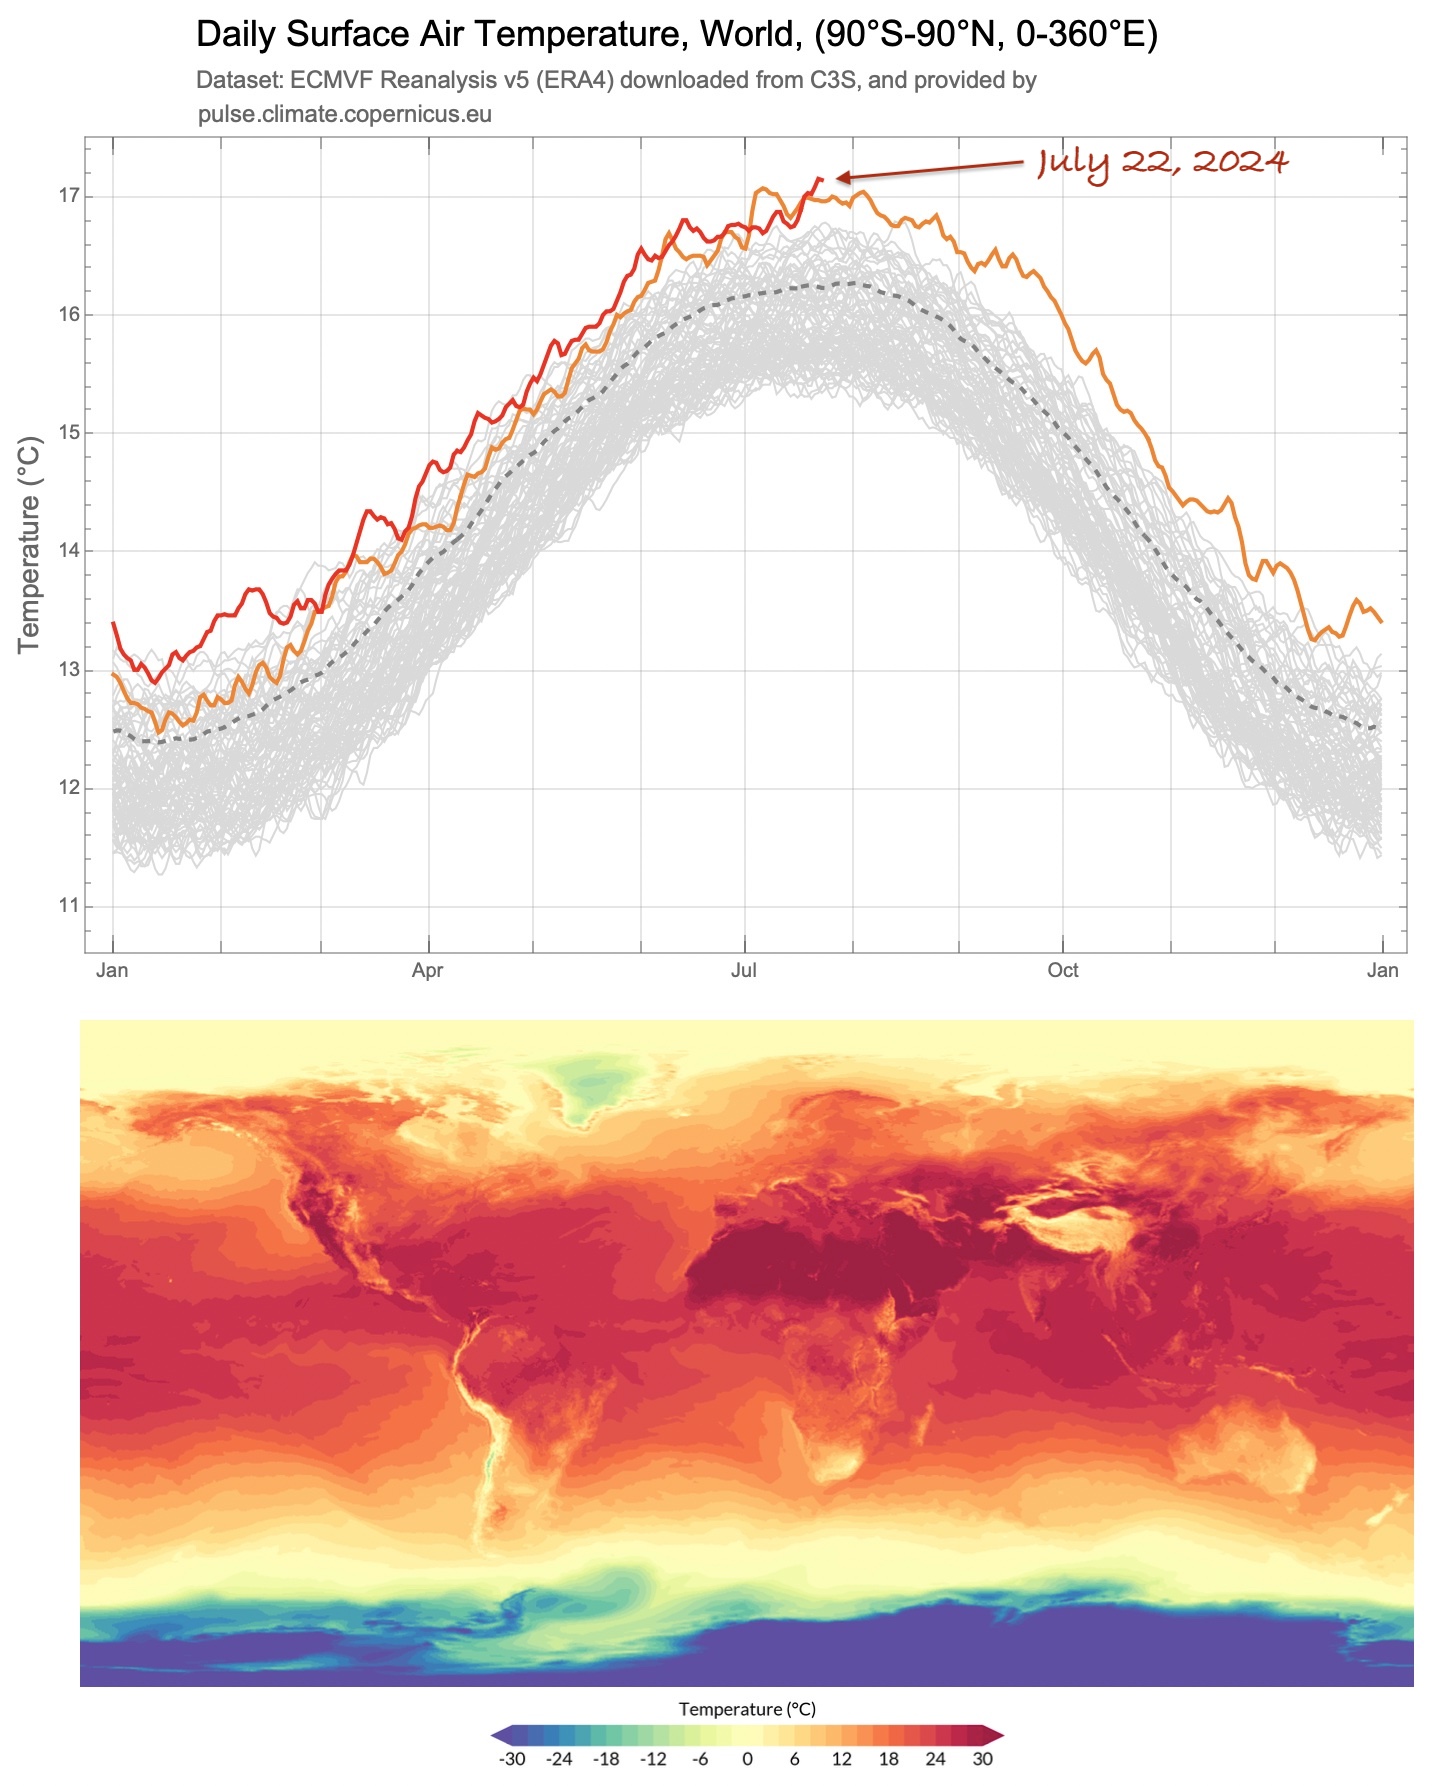 Earth's hottest day ever recorded - July 22, 2024 - analysed and visualized through climate data A plot of daily global surface air temperature by year from 1940-2024, and accompanying heatmap